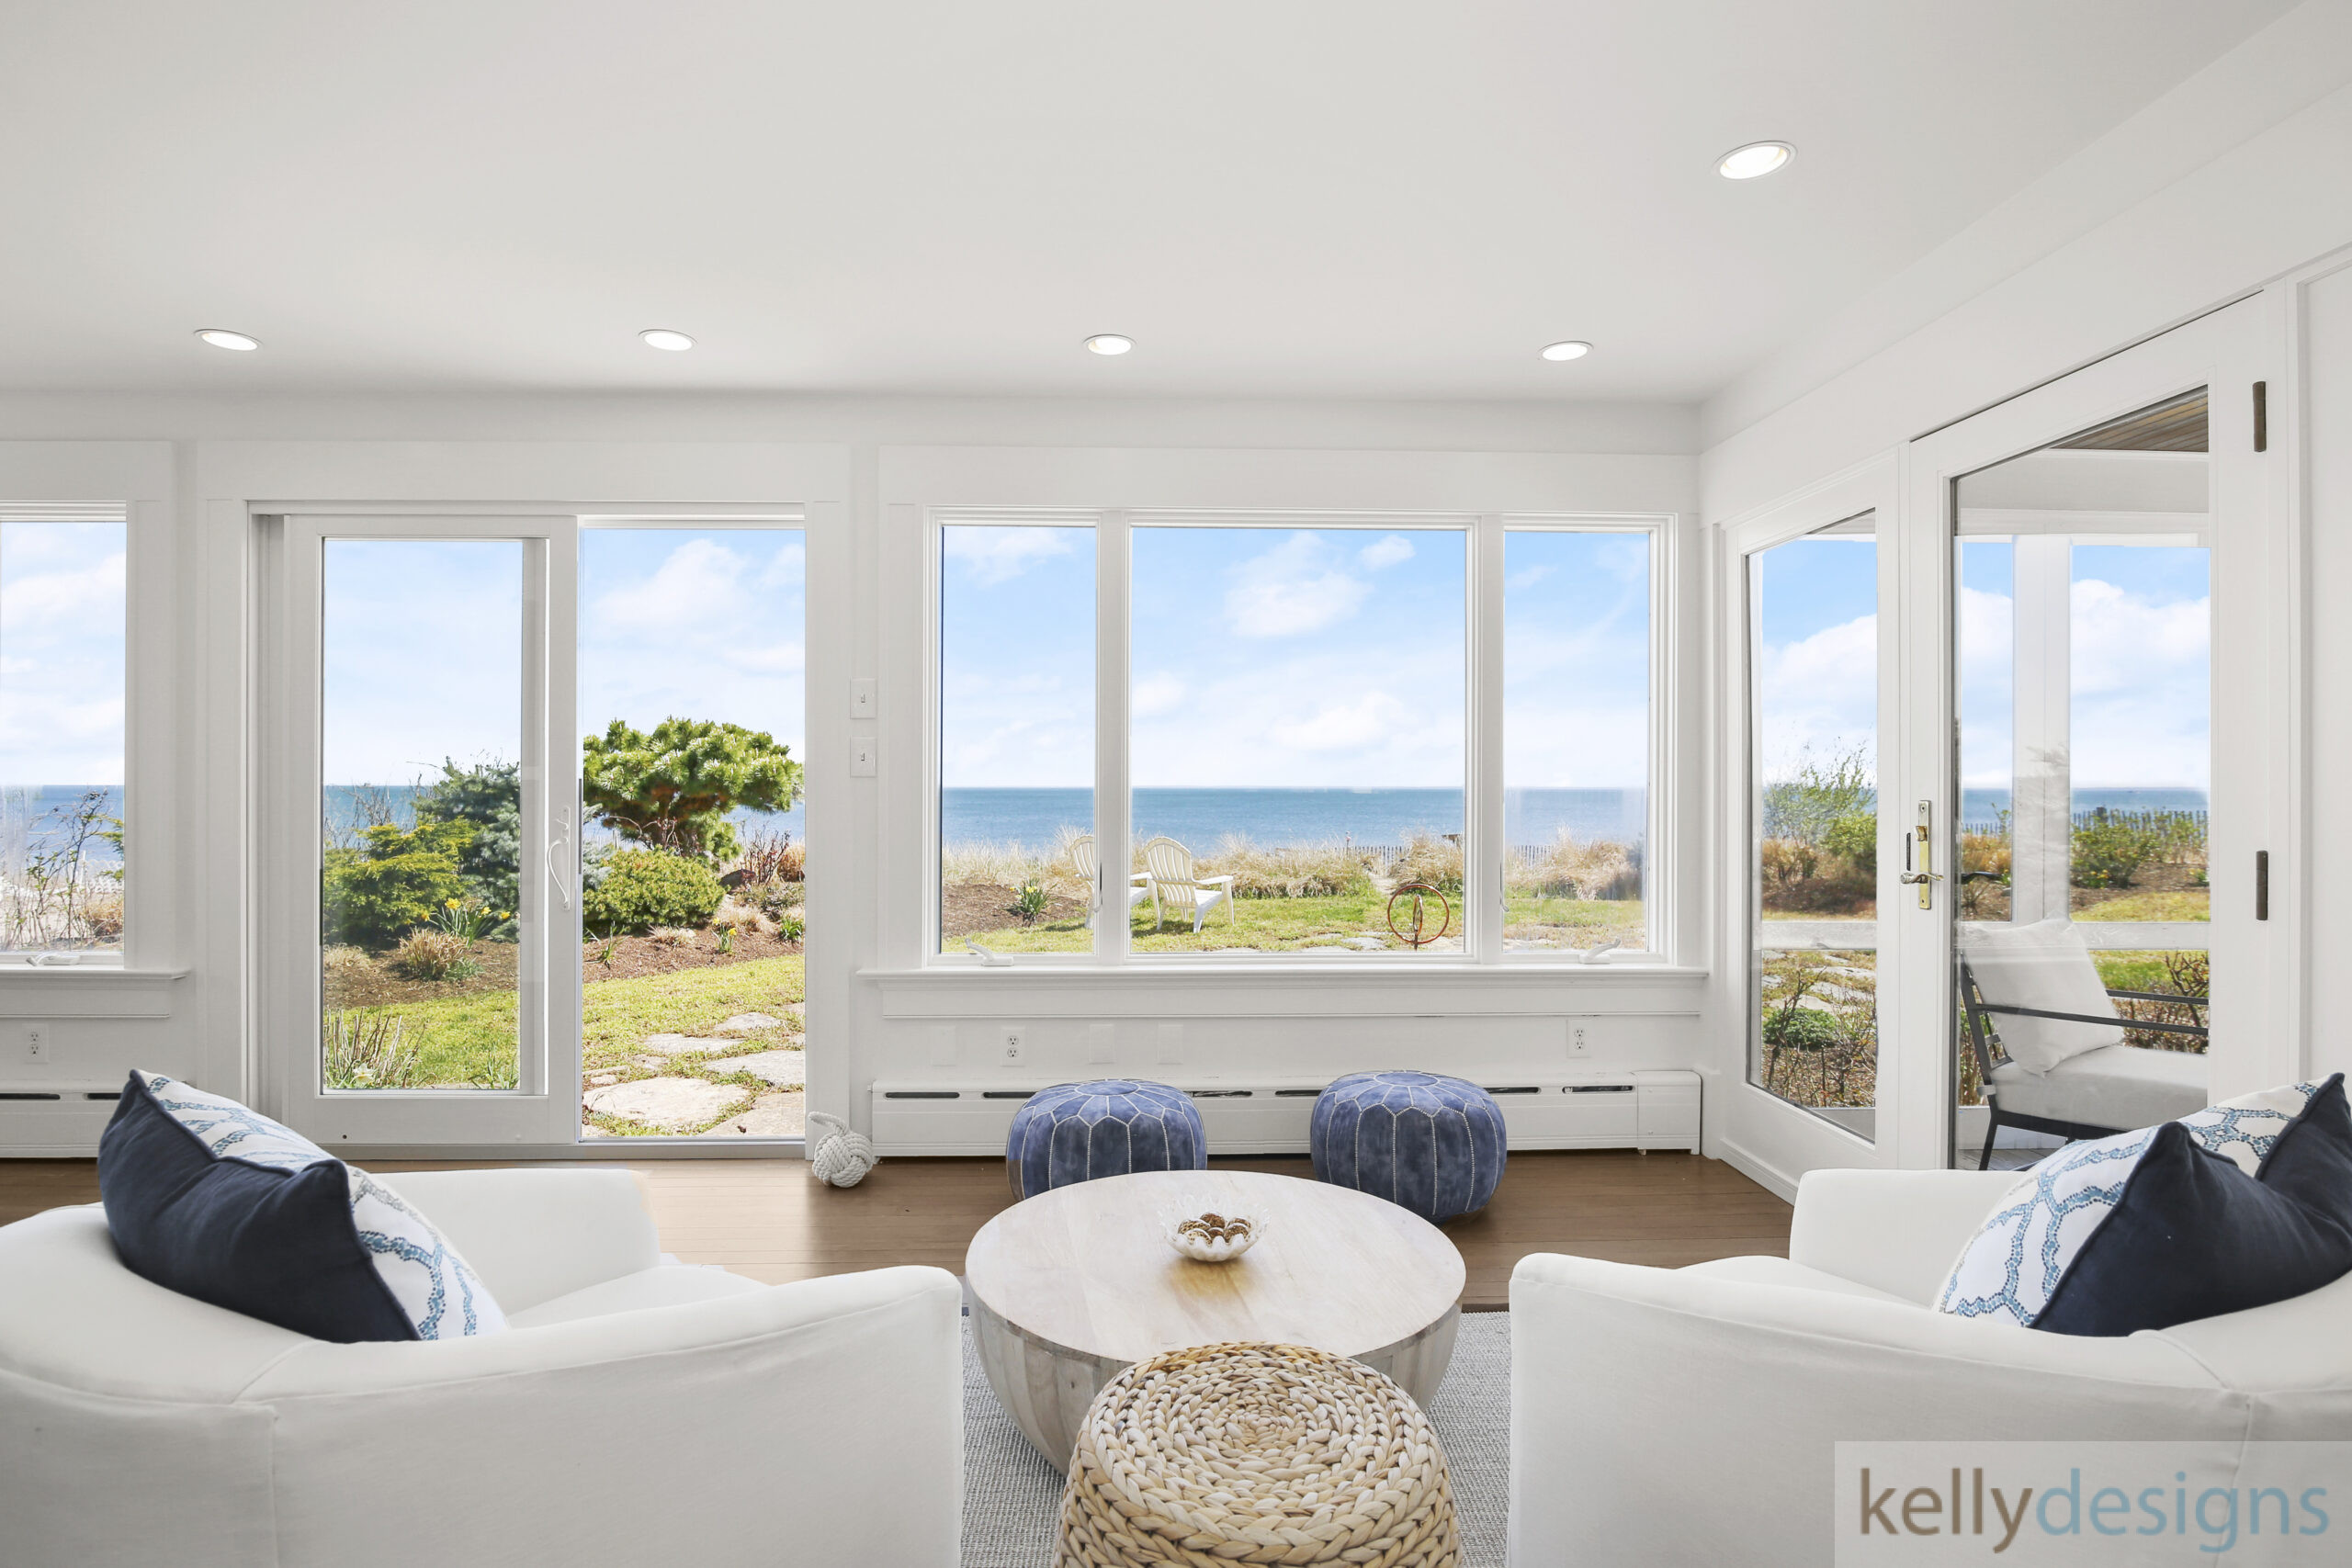 Home Staging By Kellydesigns  On Fairfield Beach Road9 081 4200x2800 300dpi